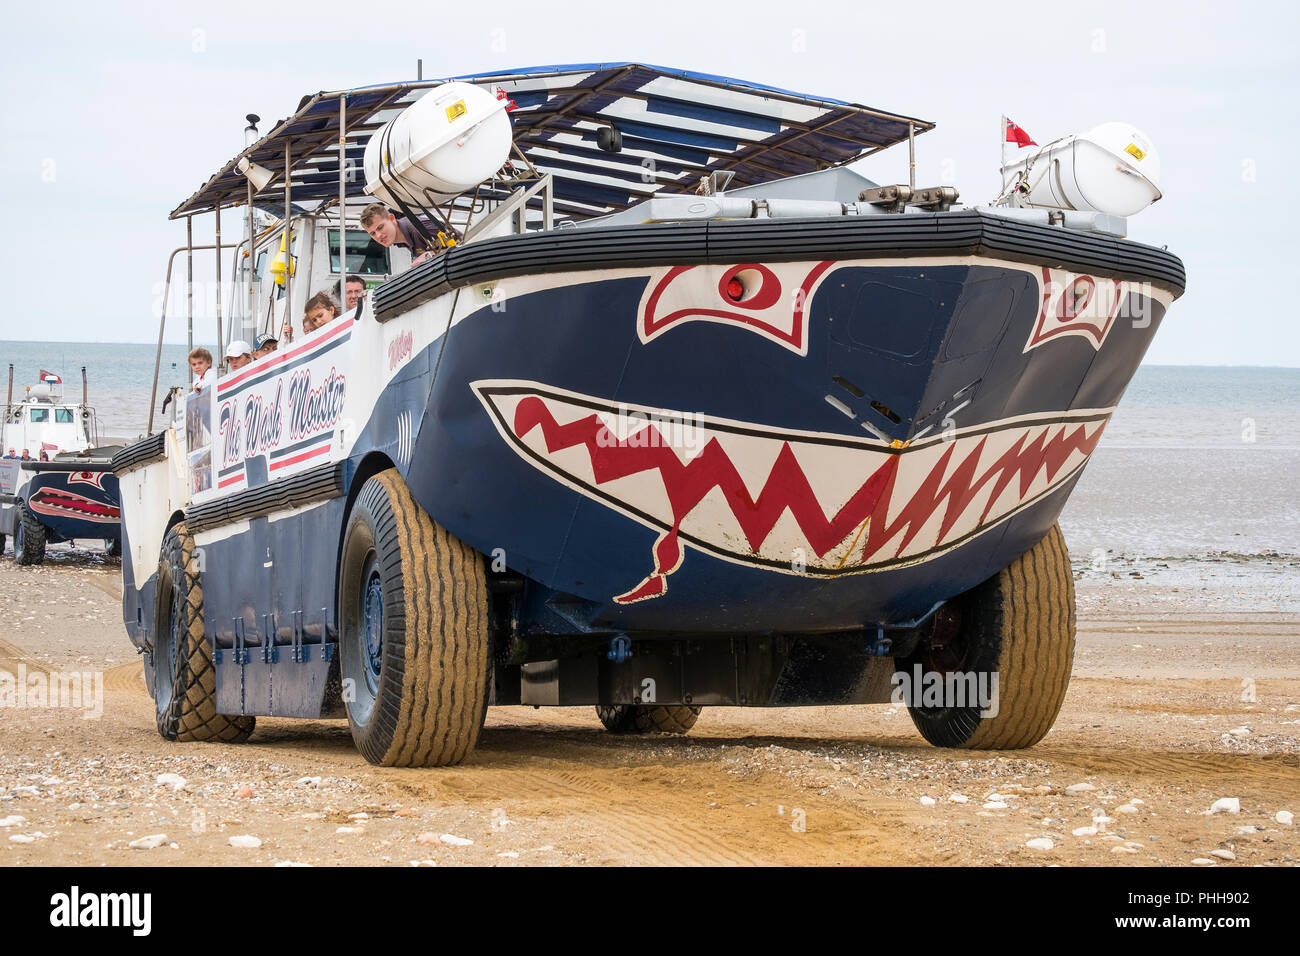 The Wash Monster amphibious vehicle moving on the beach at Hunstanton, West Norfolk, UK 2018 Stock Photo